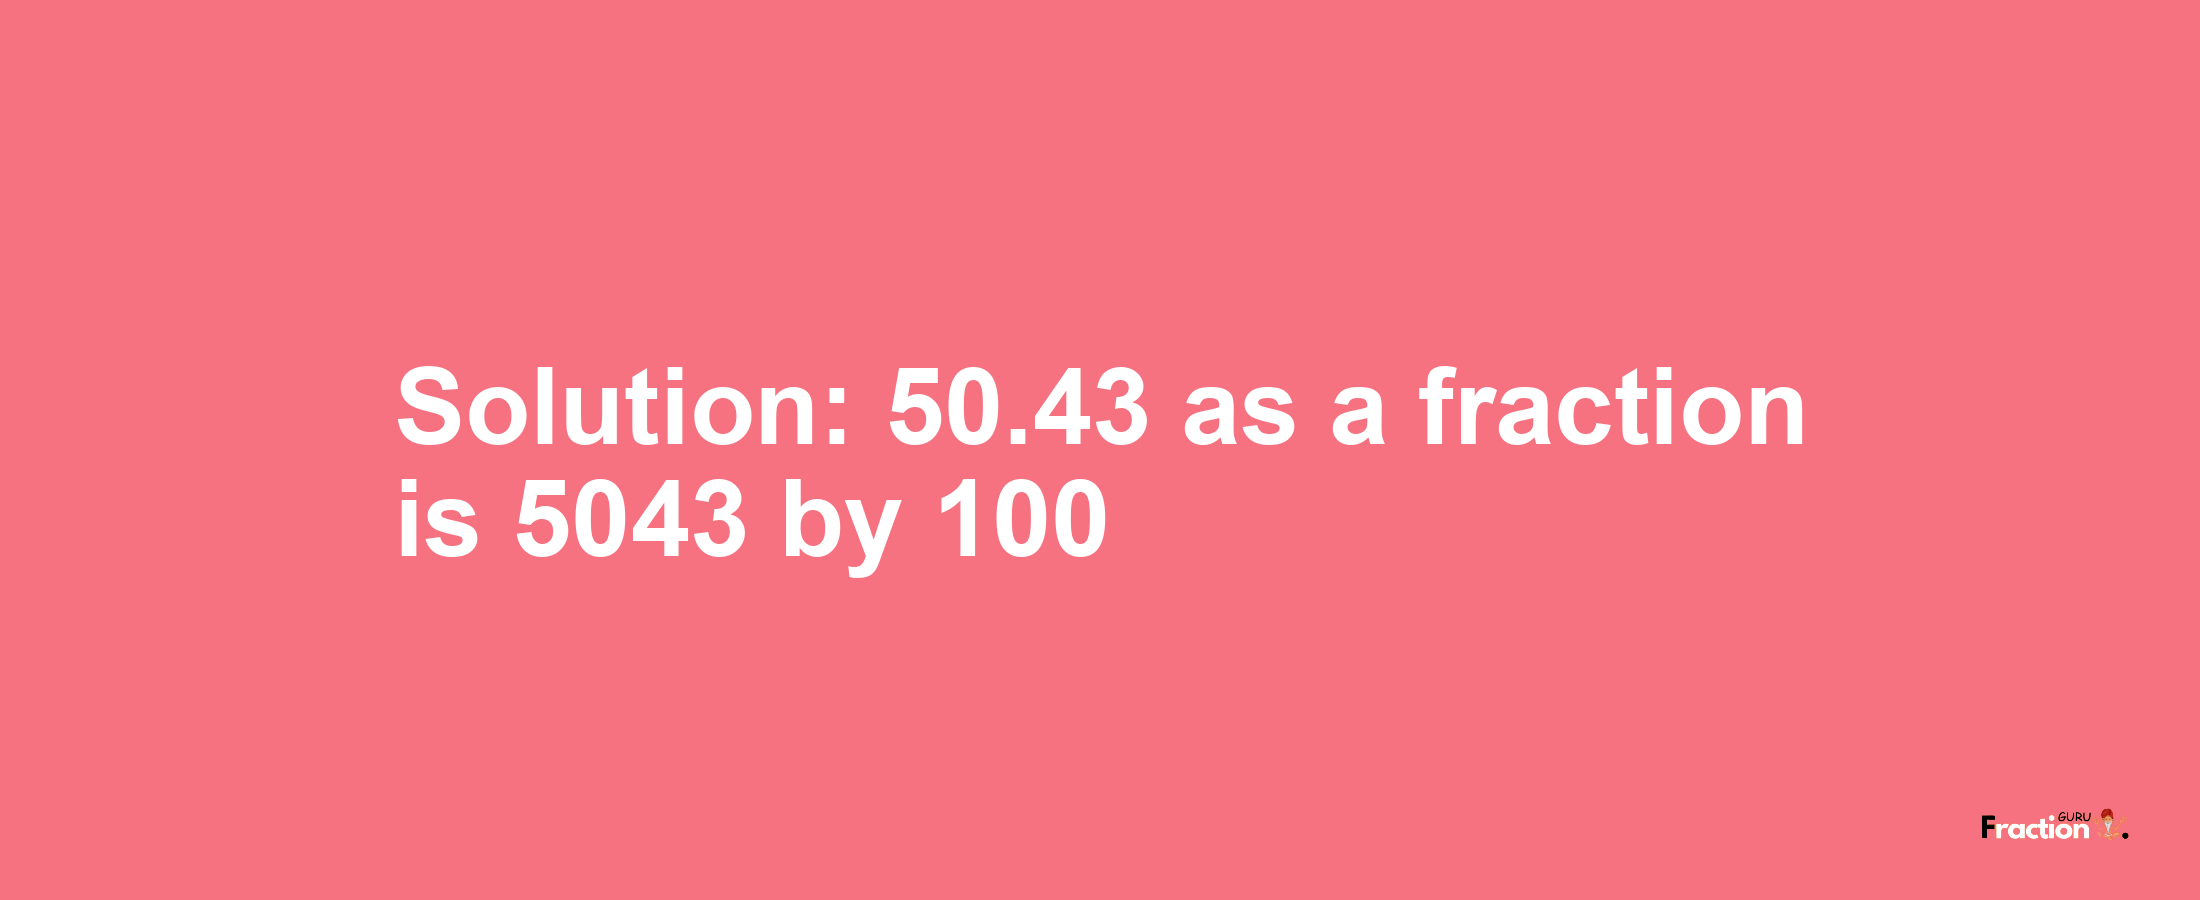 Solution:50.43 as a fraction is 5043/100